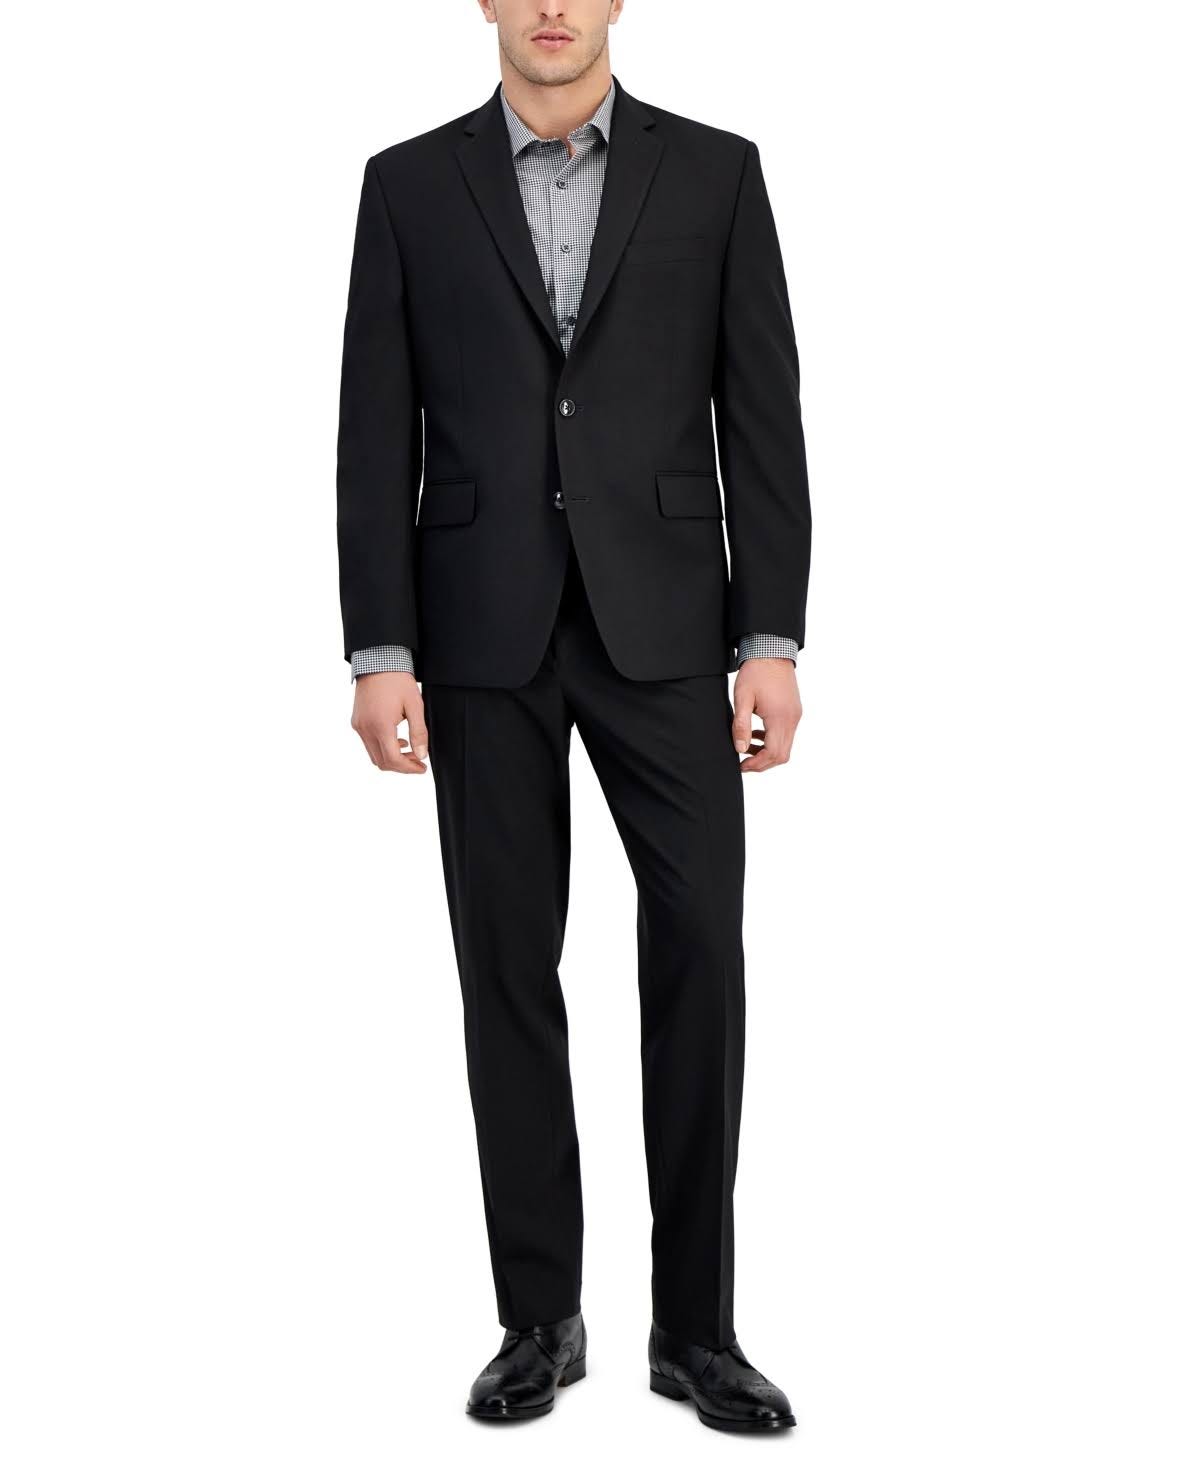 Modern Black Suit Jacket with Polyester Lining | Image